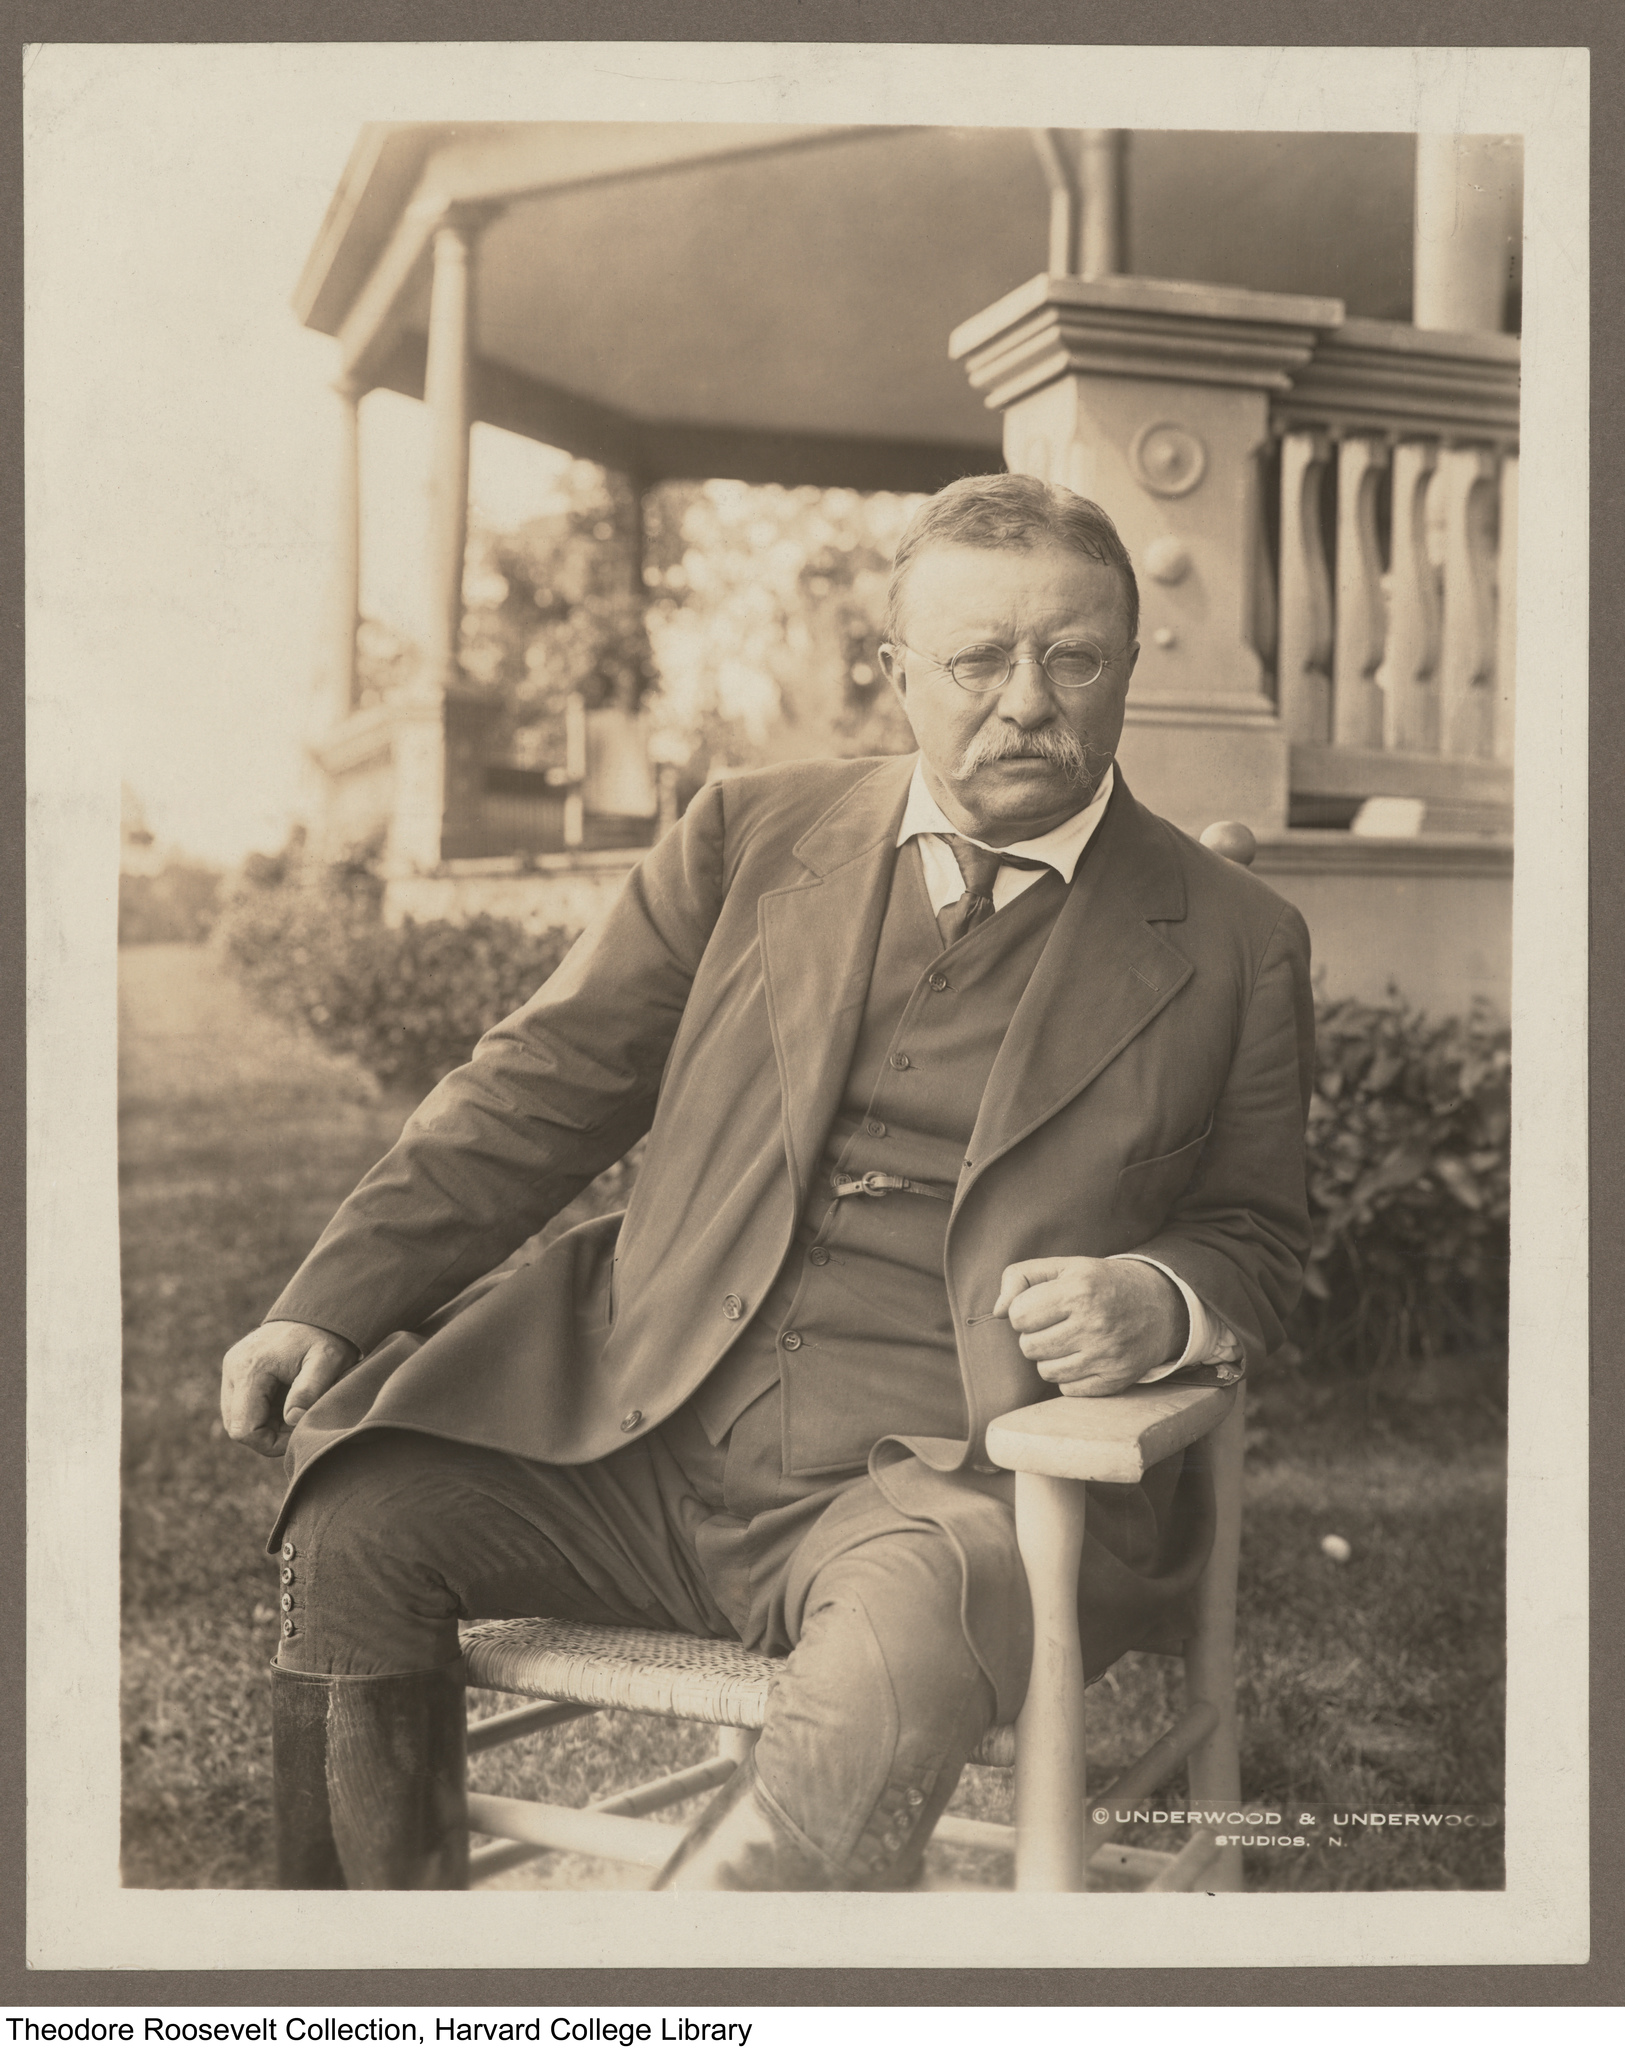 Theodore Roosevelt at his home Sagamore Hill, 1918